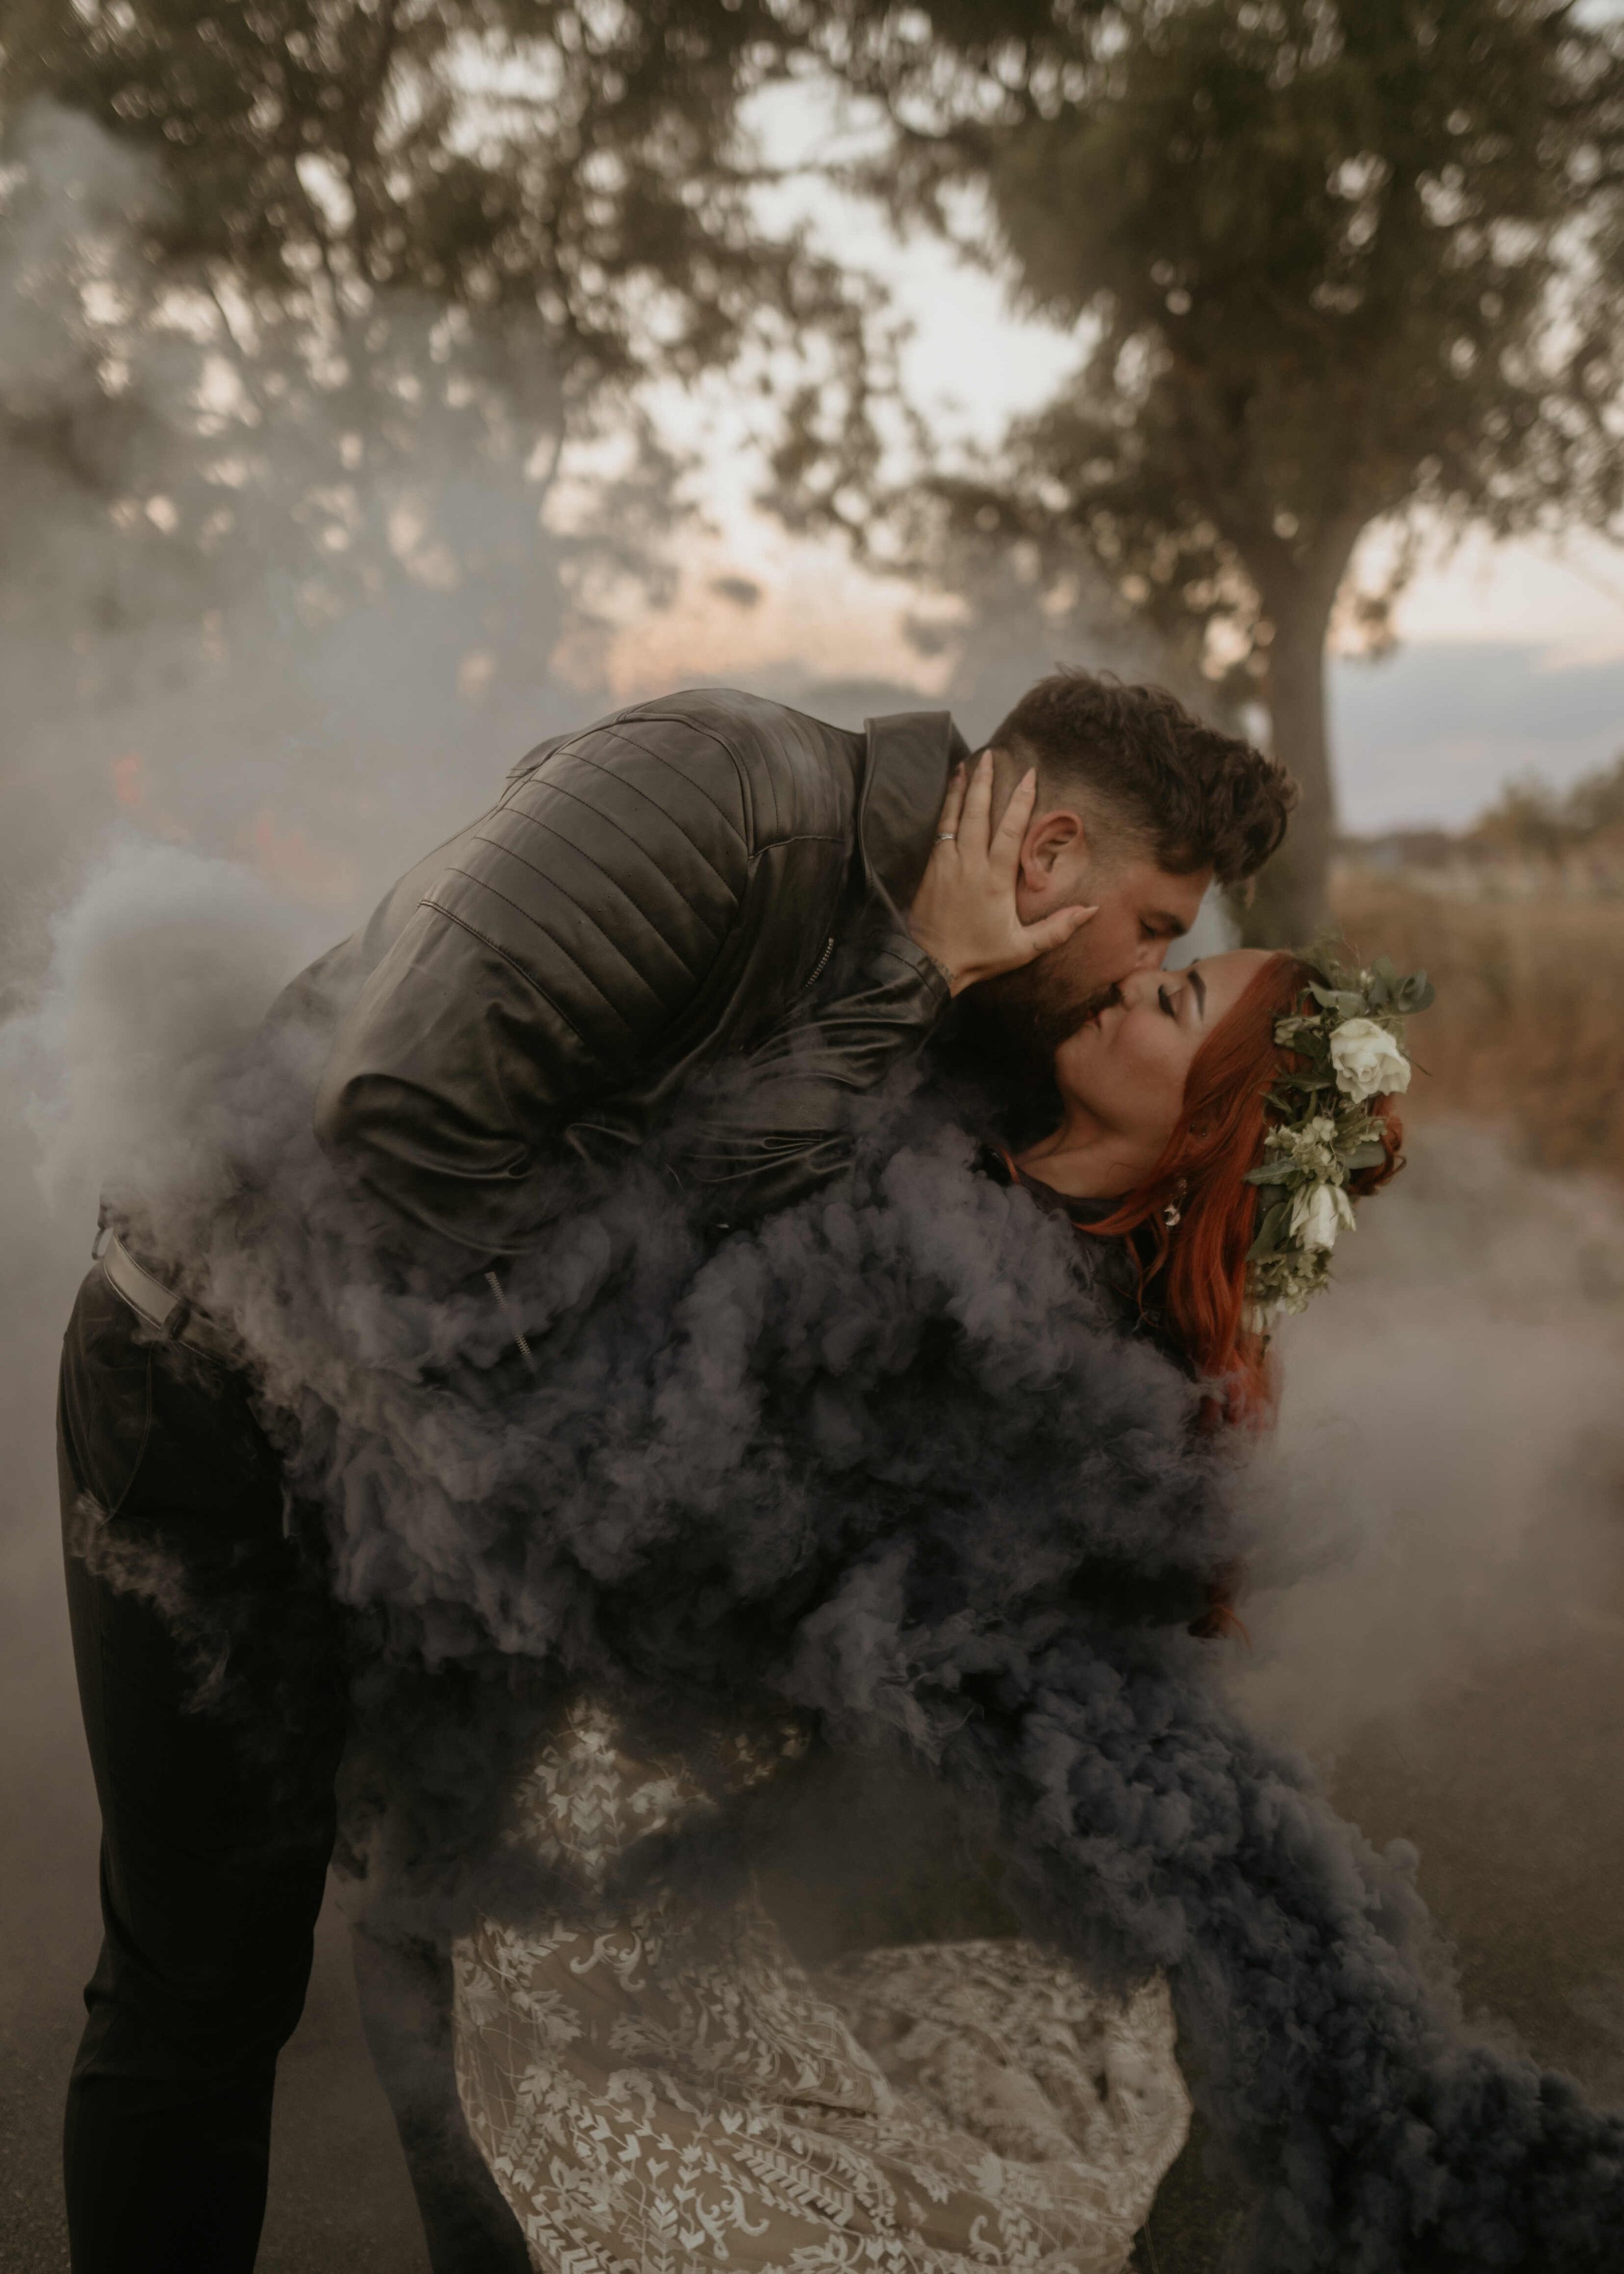  An unconventional couple kissing on their wedding day.They are both wearing leather jackets and you can see them trough a grey cloud of smoke. 